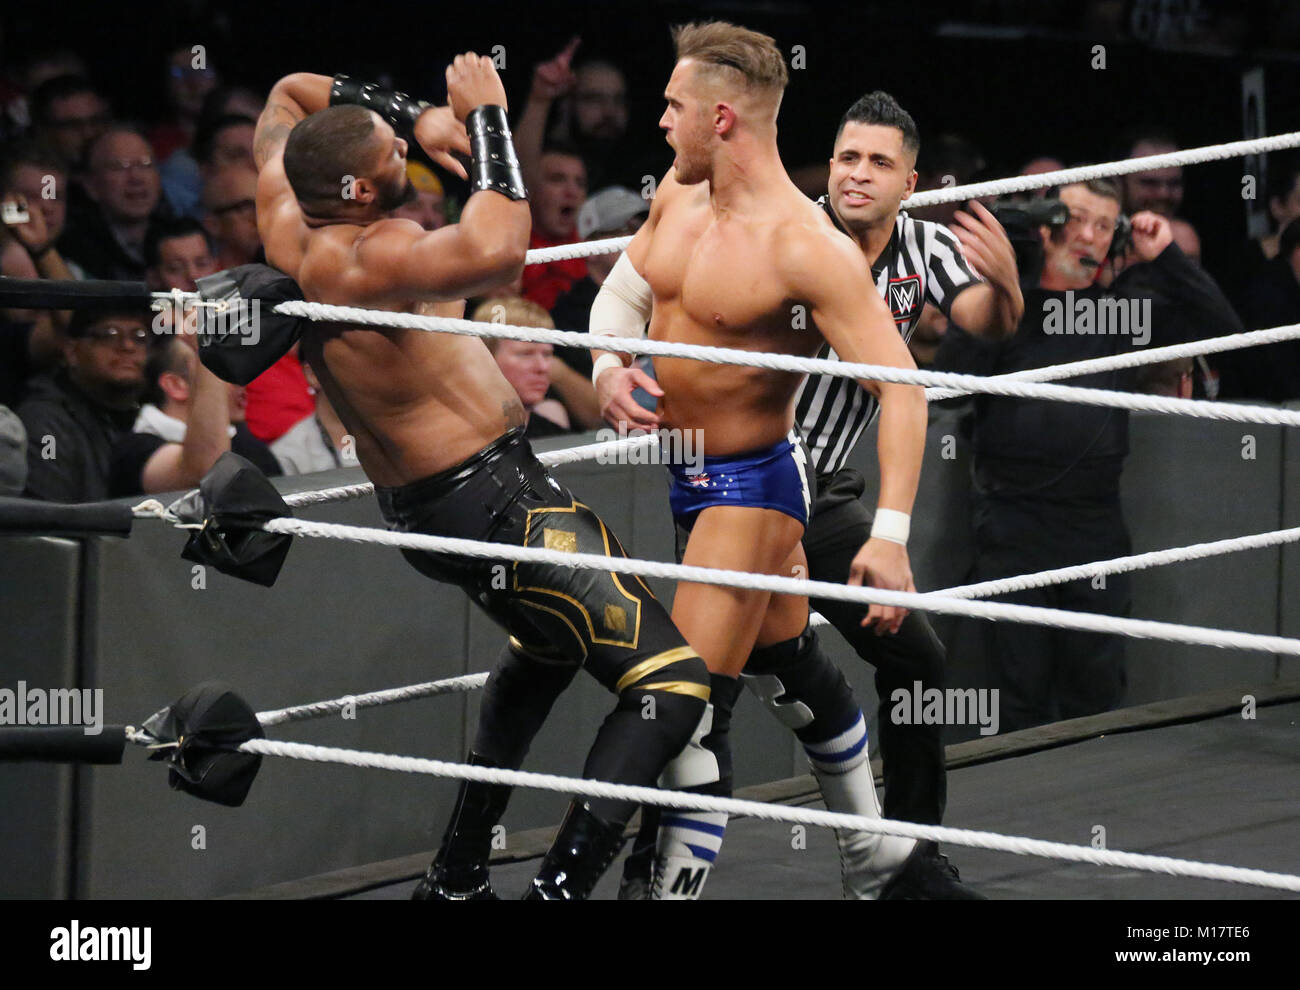 Philadelphia, PA, USA. 27th Jan, 2018. TM61 wins match at WWE NXT Take Over at Wells Fargo Center in Philadelphia, Pa on January 27, 2018 Credit: Star Shooter/Media Punch/Alamy Live News Stock Photo